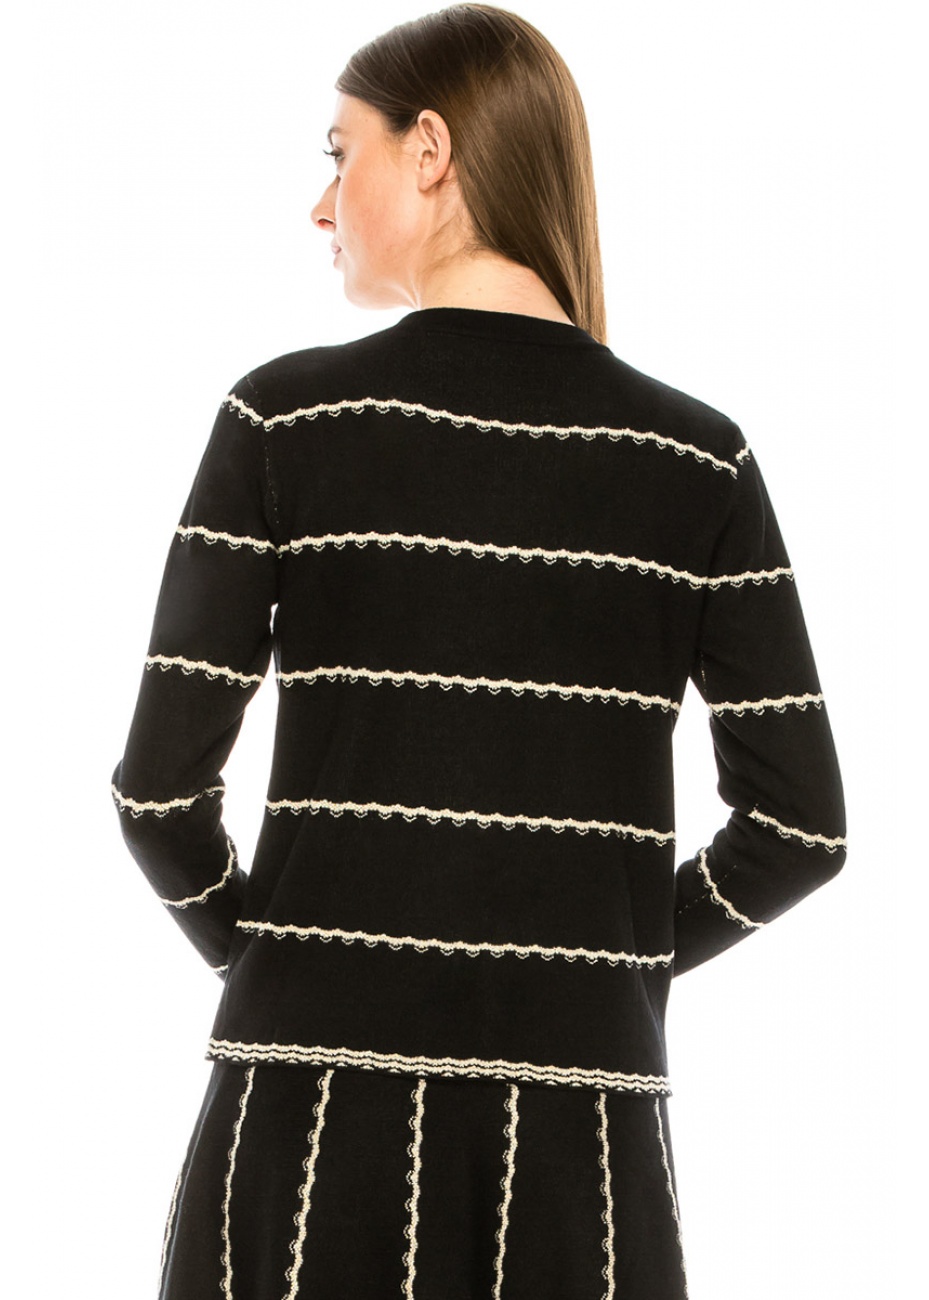 Striped sweater in black and white